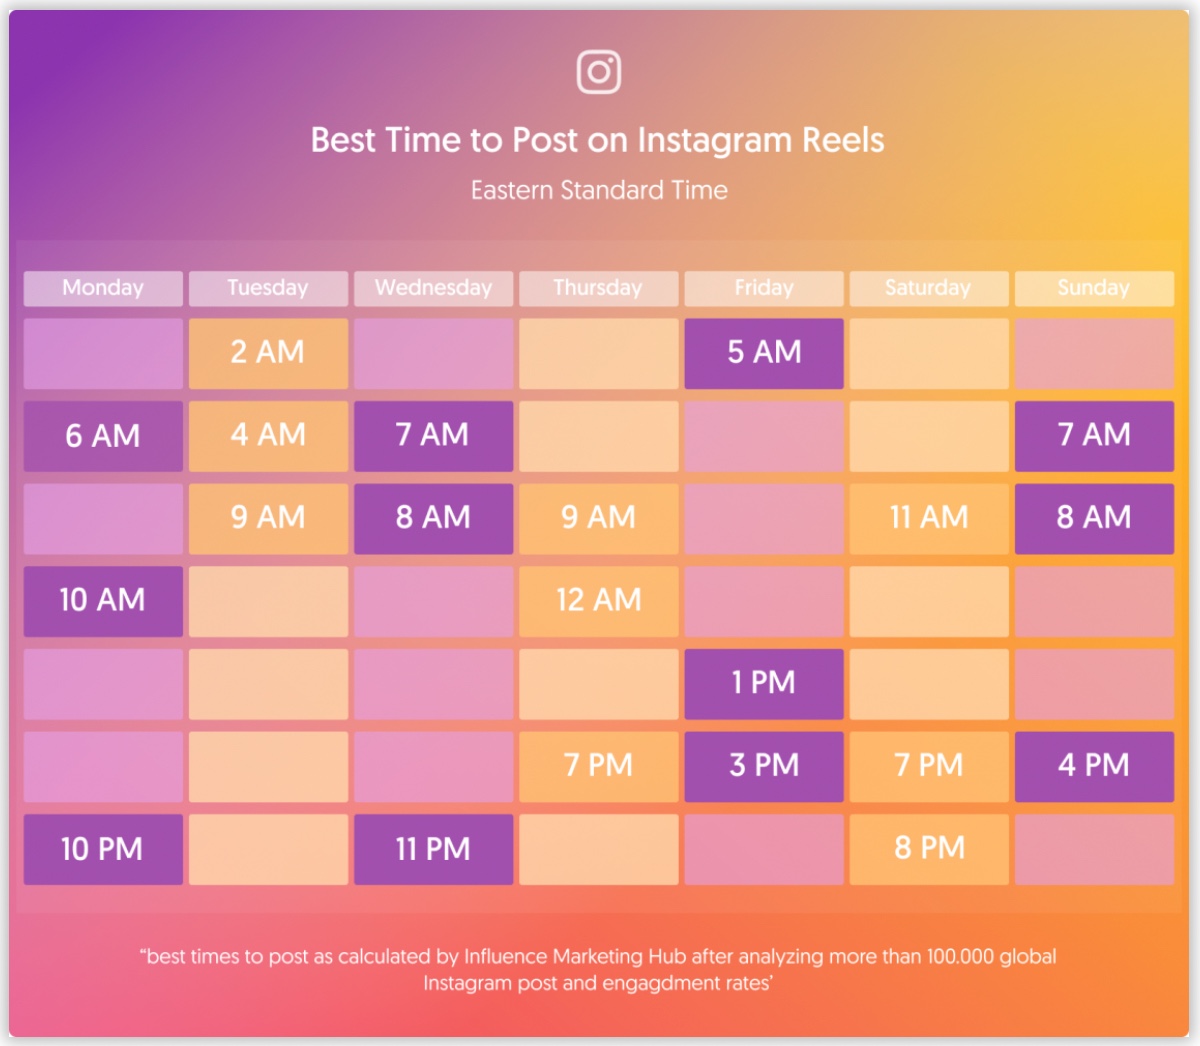 Best Time to Post on Instagram Reels 